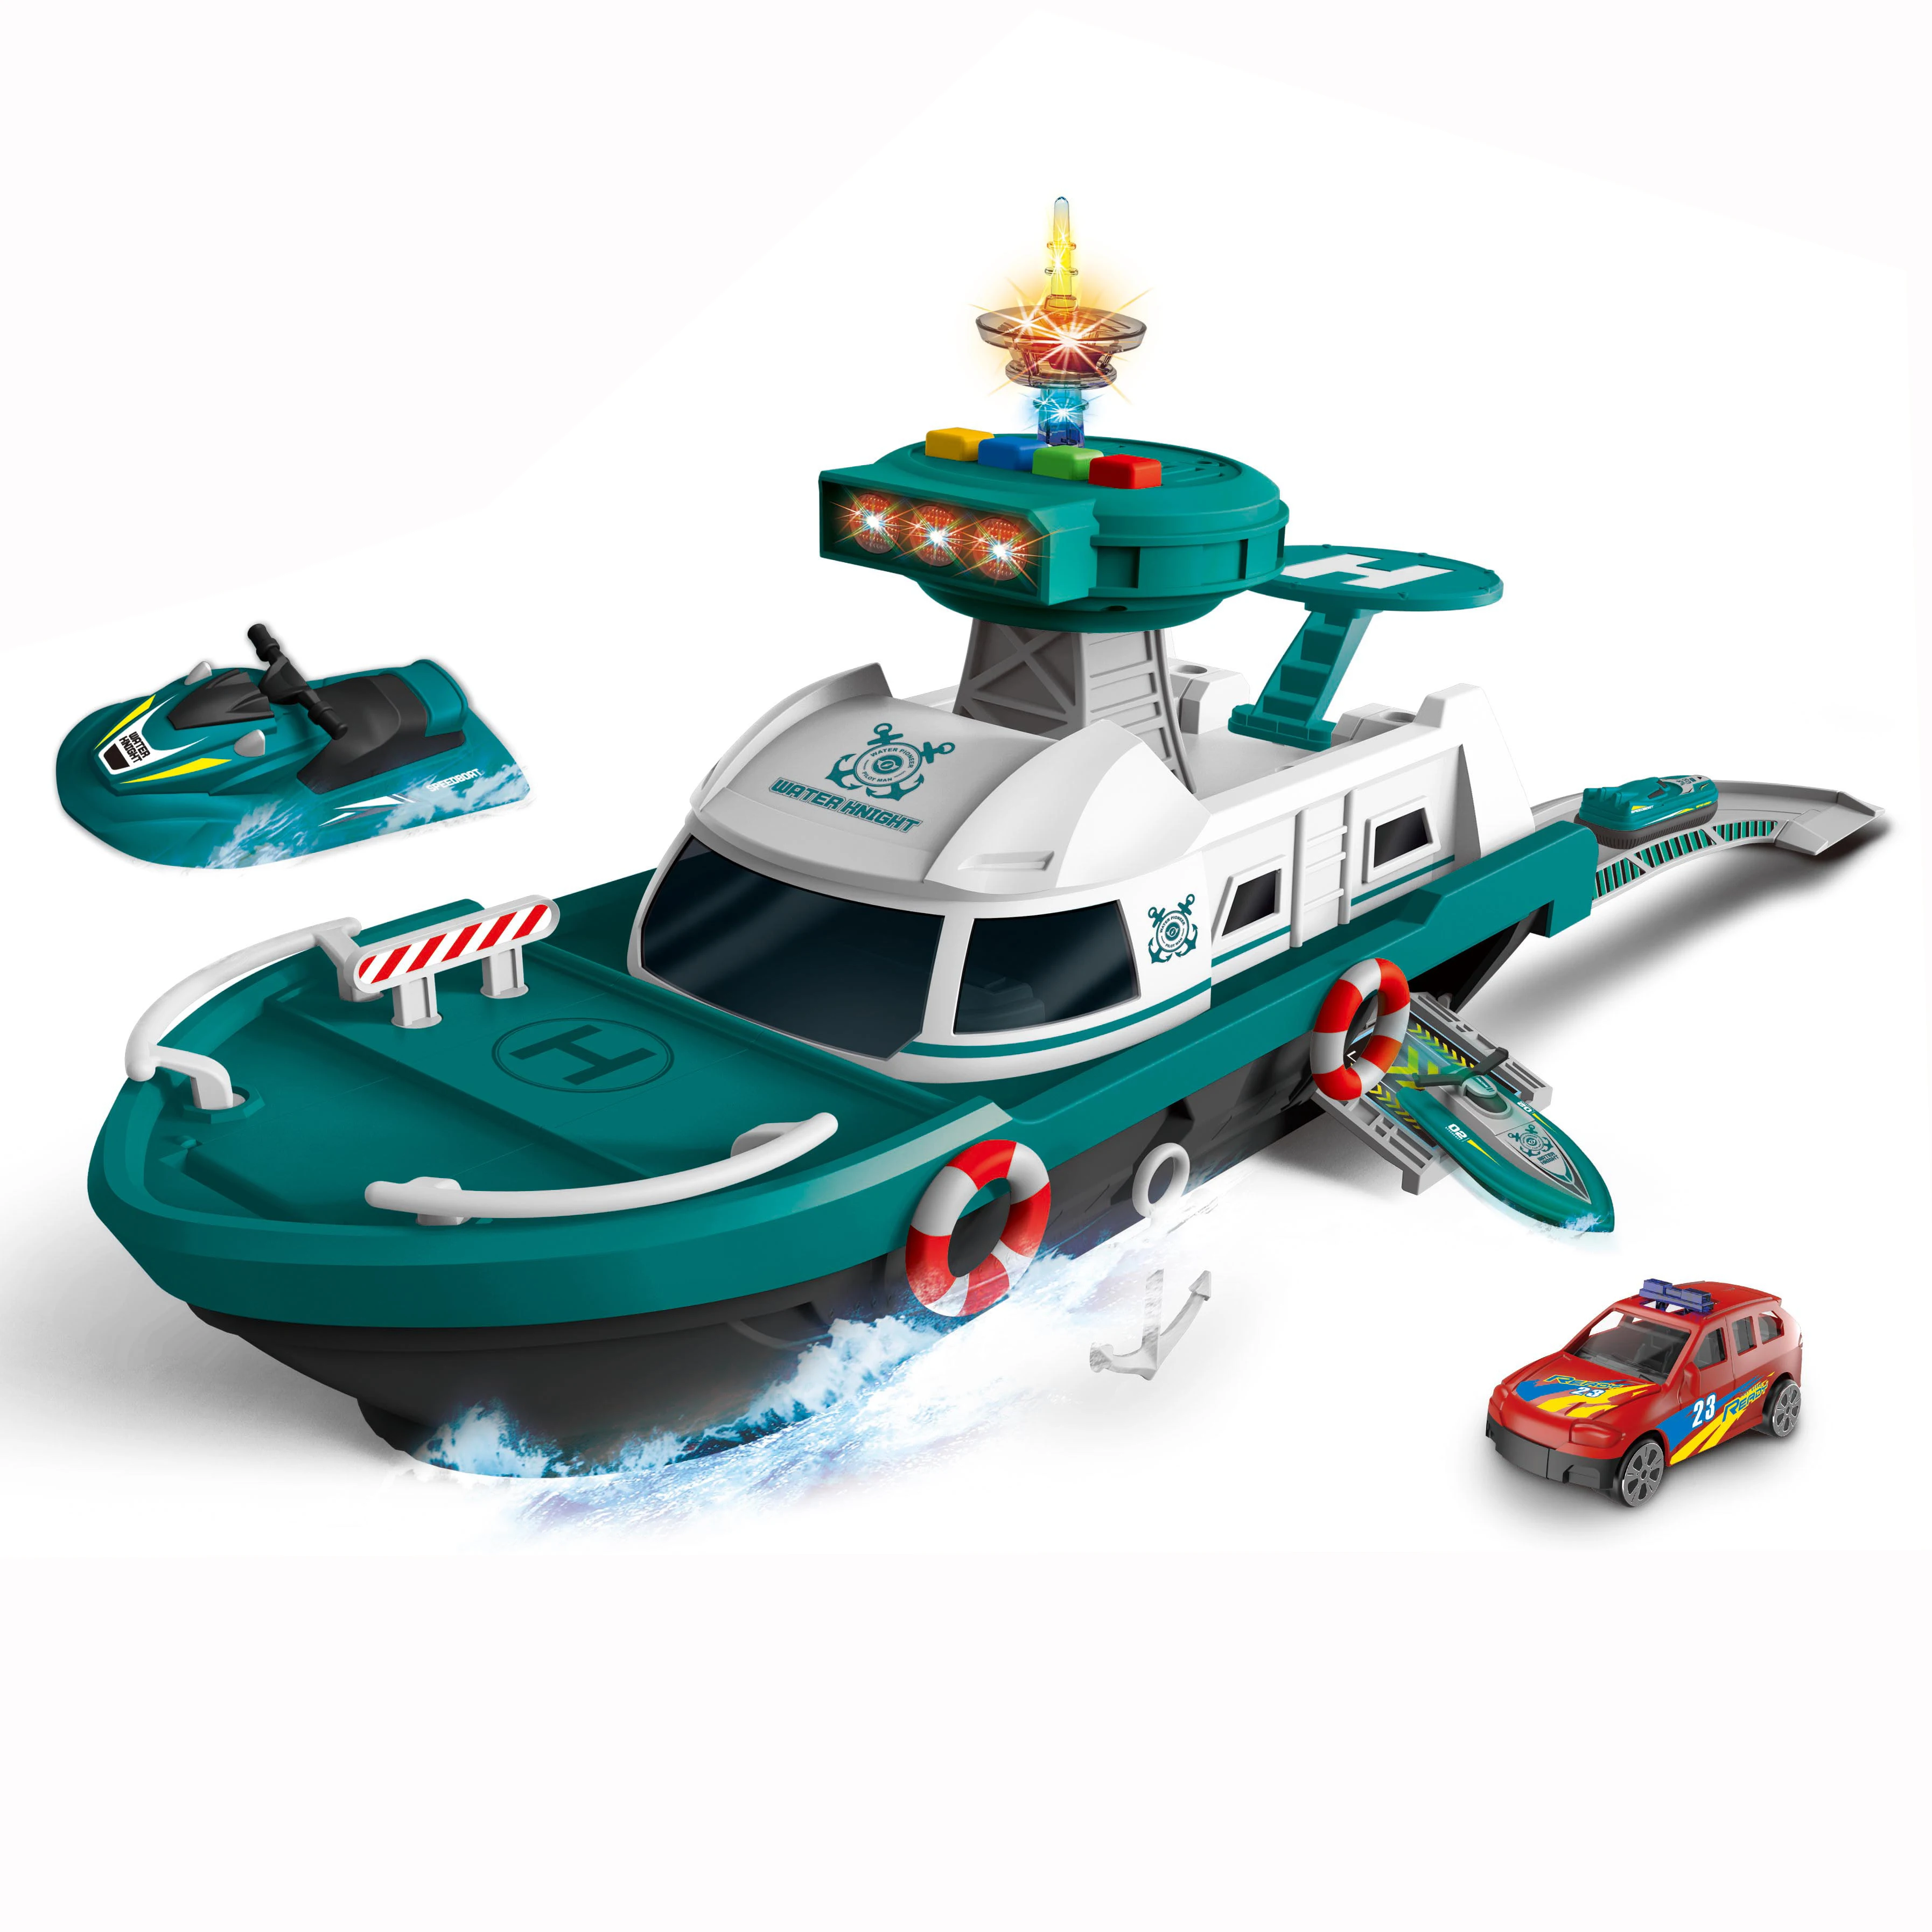 New 1:64 Alloy Car Toy Slided Water Sanitation Ship Green Electric Cartoon  Boat - Buy New Alloy Car Toy,Slided Water Sanitation Ship,Green Electric  Cartoon Boat Product on 